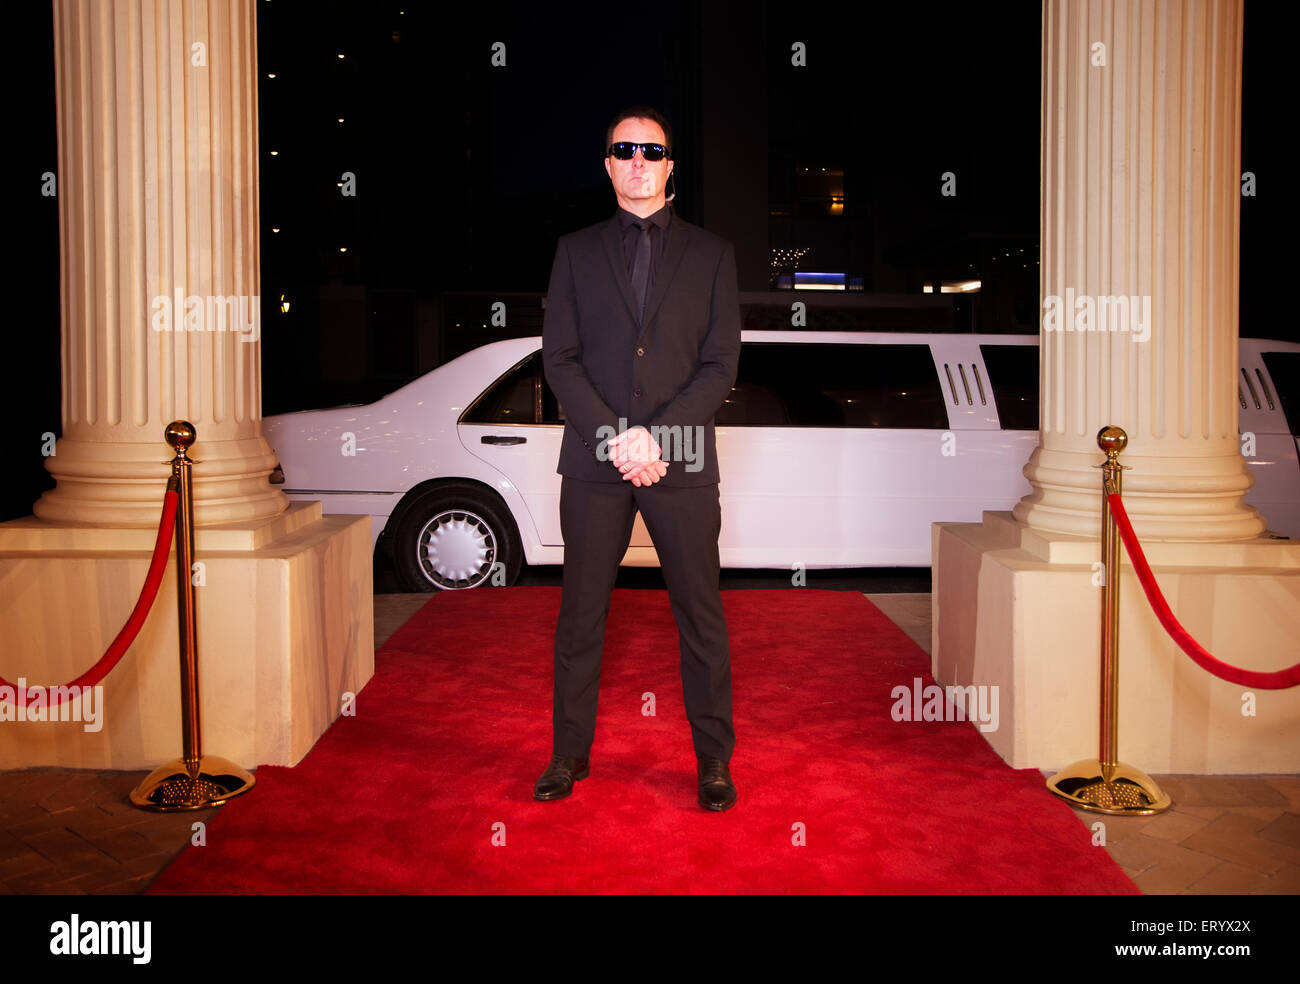 Serious bodyguard in sunglasses protecting red carpet at event Stock Photo